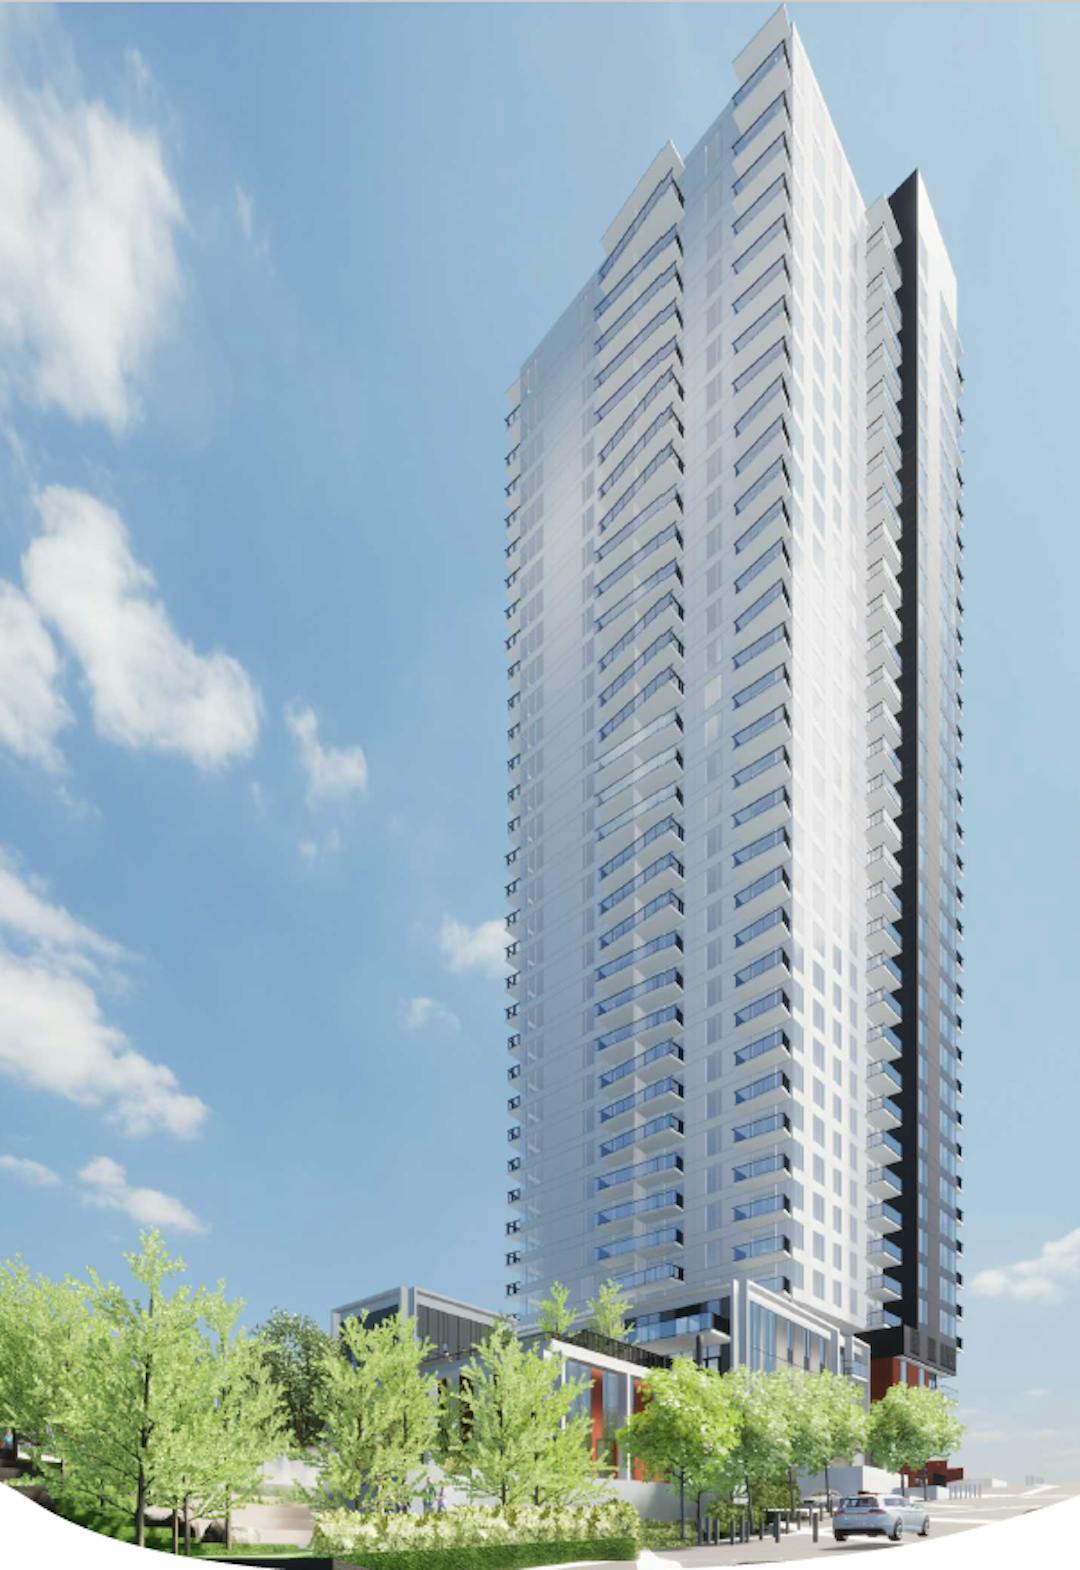 Rendering of proposed 33 storey high-rise tower with 352 secured market rental housing units.